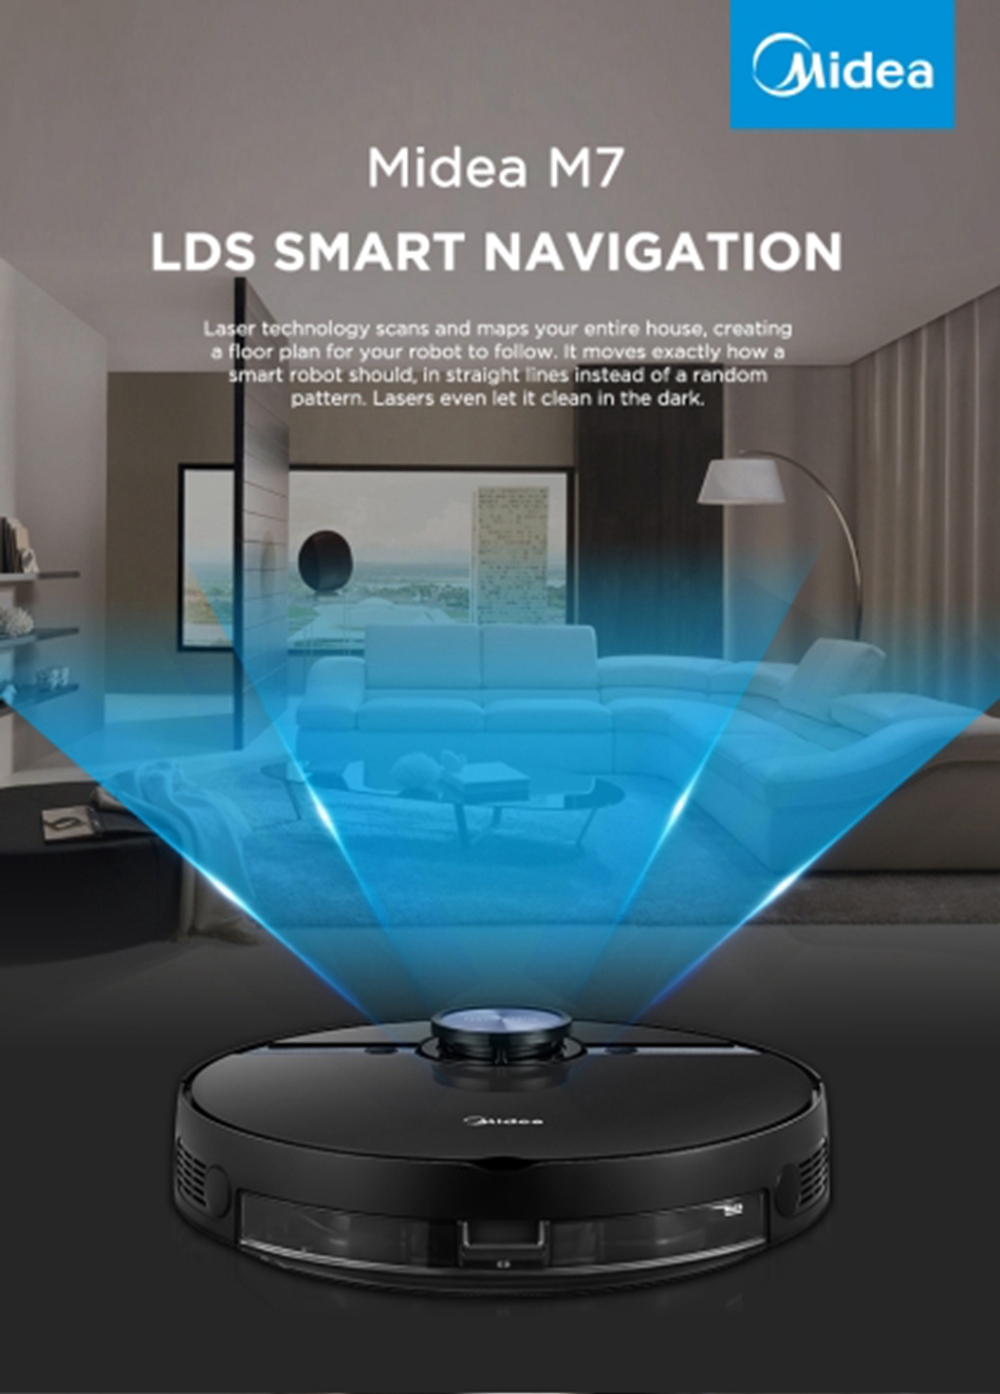 Midea M7 Robot Vacuum Cleaner 2 in 1 Sweeping and Mopping 4000Pa Cyclone Suction LDS Smart Navigation Electronic Water Tank 450ml Dust Box APP Control - Black